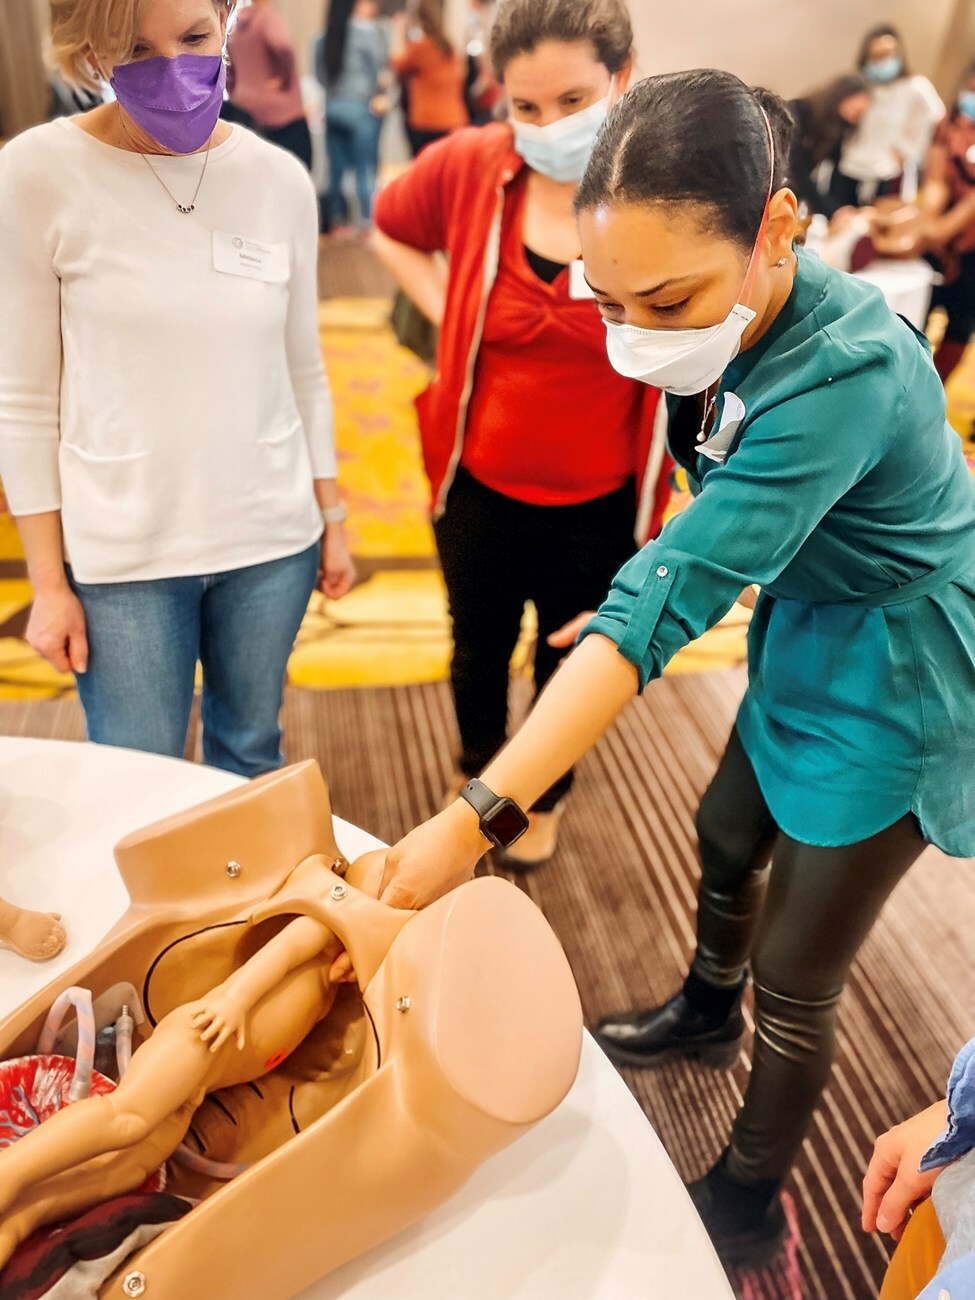 An indoor scene at a training event in a conference area. Three individuals, all wearing face masks, focus on a medical simulation mannequin that replicates a birthing scenario. The woman in the foreground, dressed in a teal shirt, is actively engaged with the mannequin while the other two, one in a white shirt and the other in a red shirt, observe closely. The background shows other participants in groups working on hands-on training.